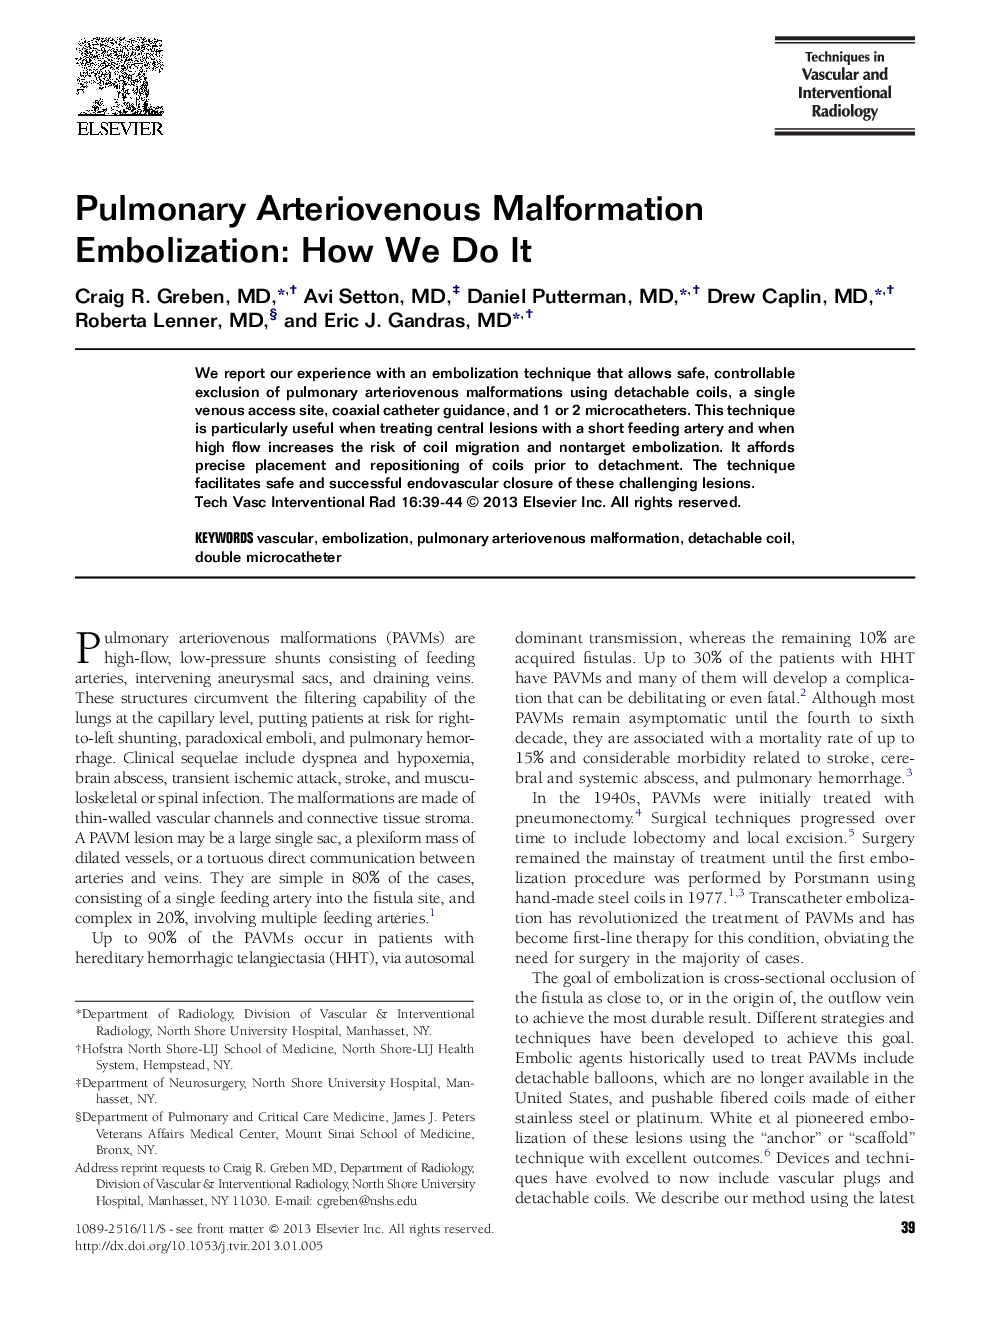 Pulmonary Arteriovenous Malformation Embolization: How We Do It